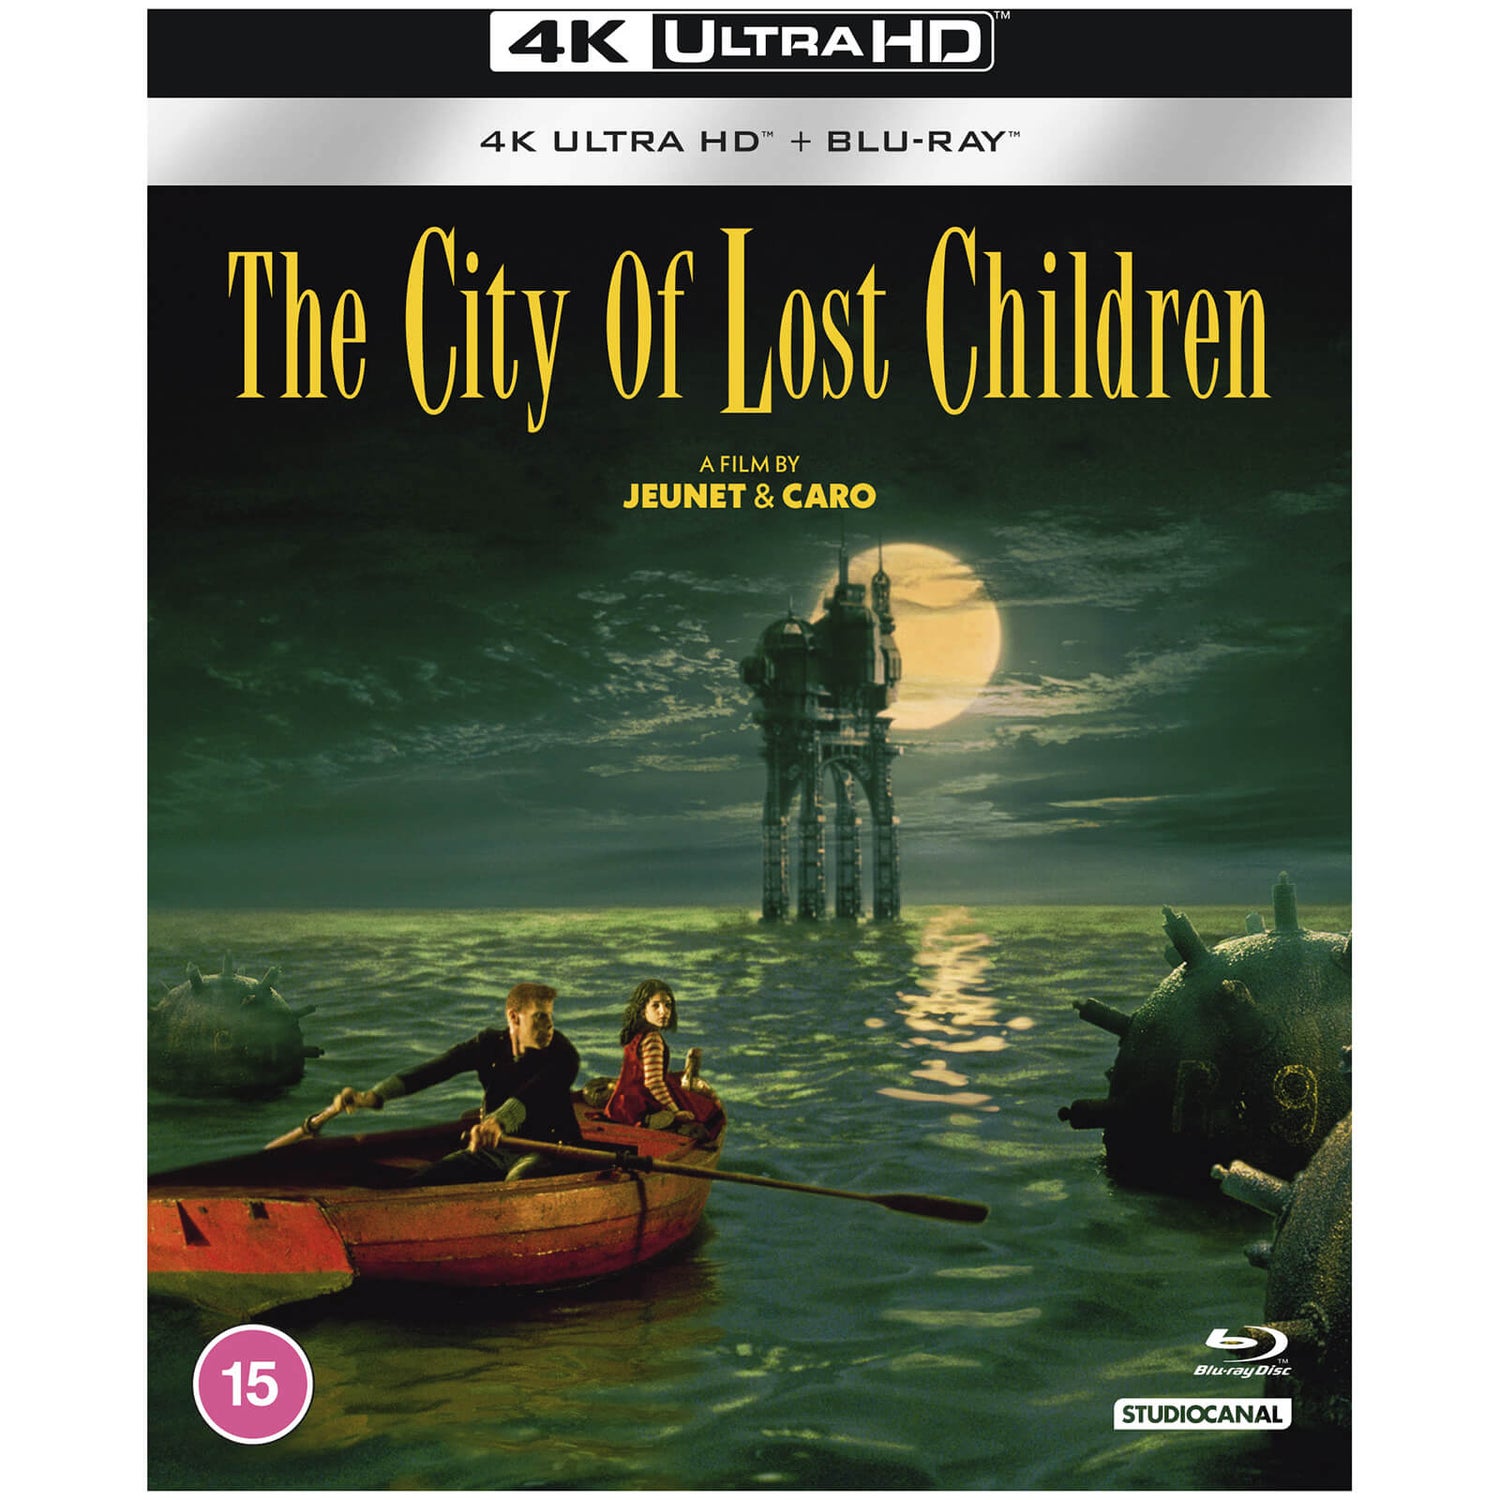 The City of Lost Children - 4K Ultra HD (Includes Blu-ray)